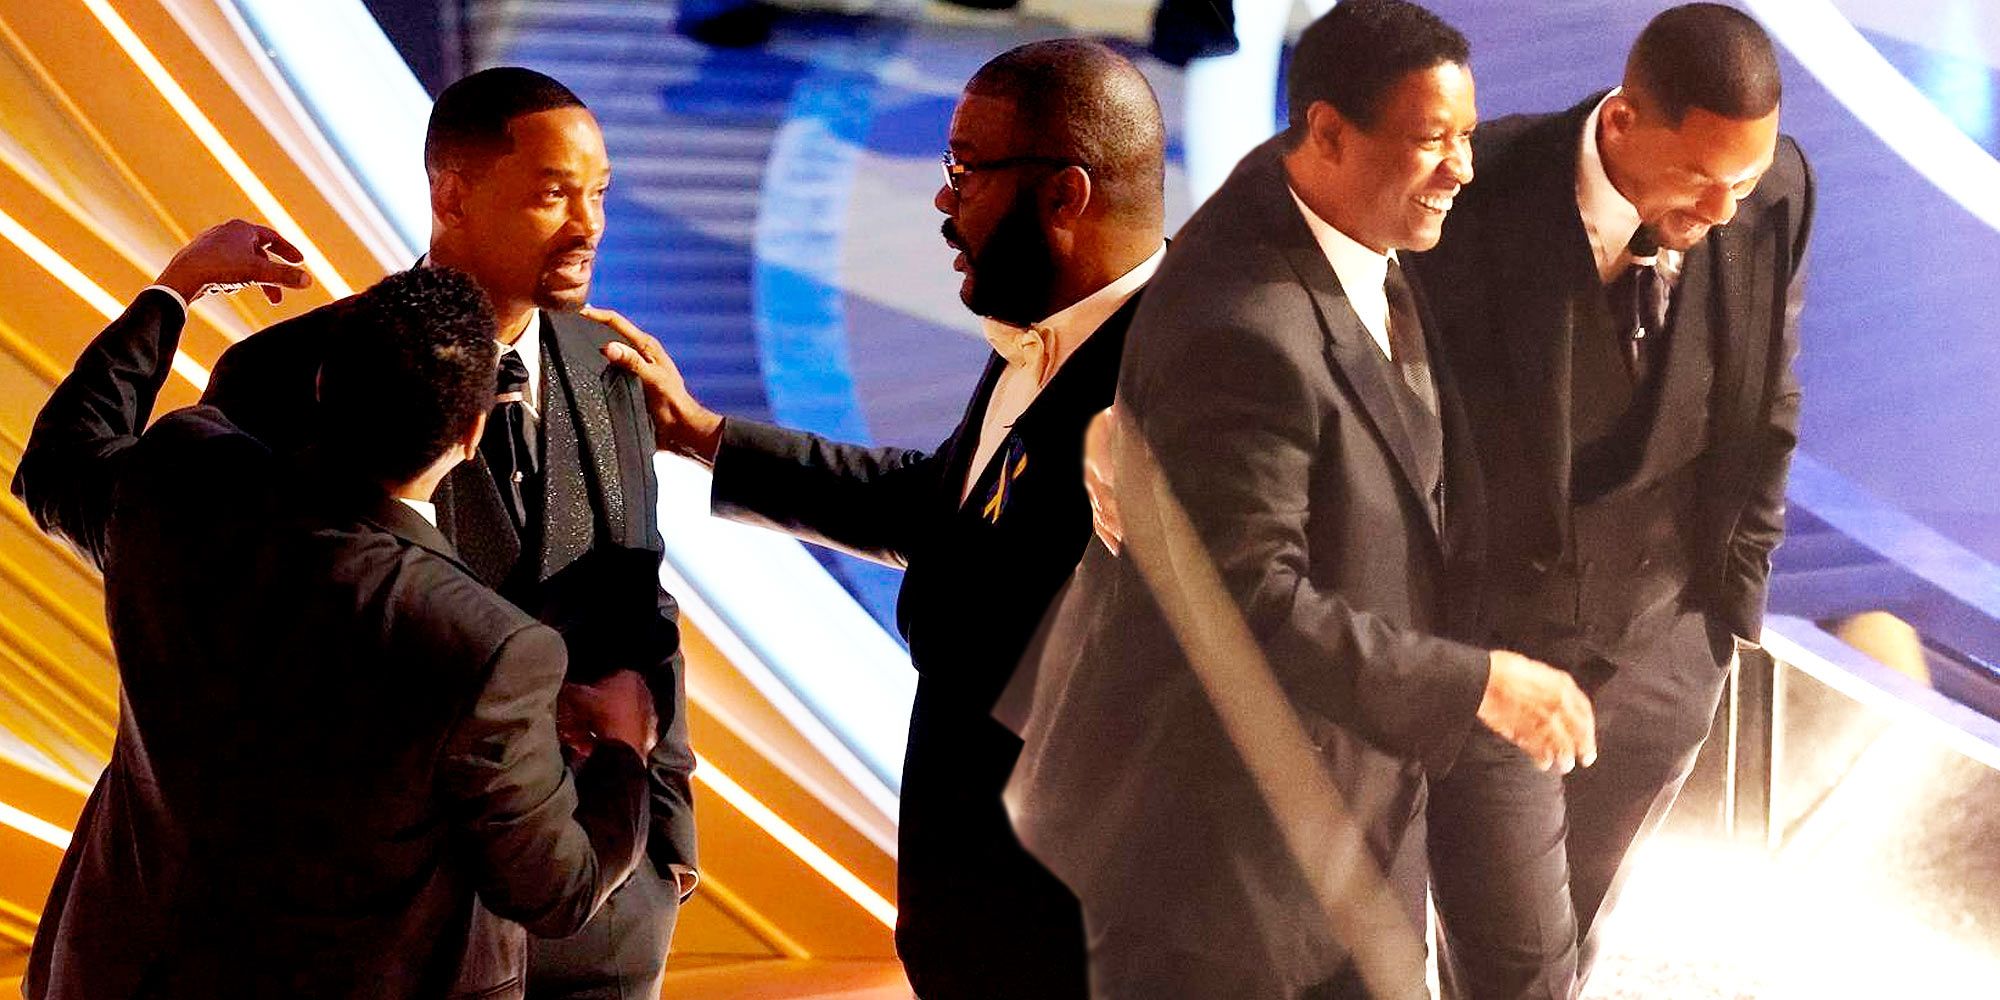 Audience reaction to will smith slap at the oscars, tyler perry, denzel washington